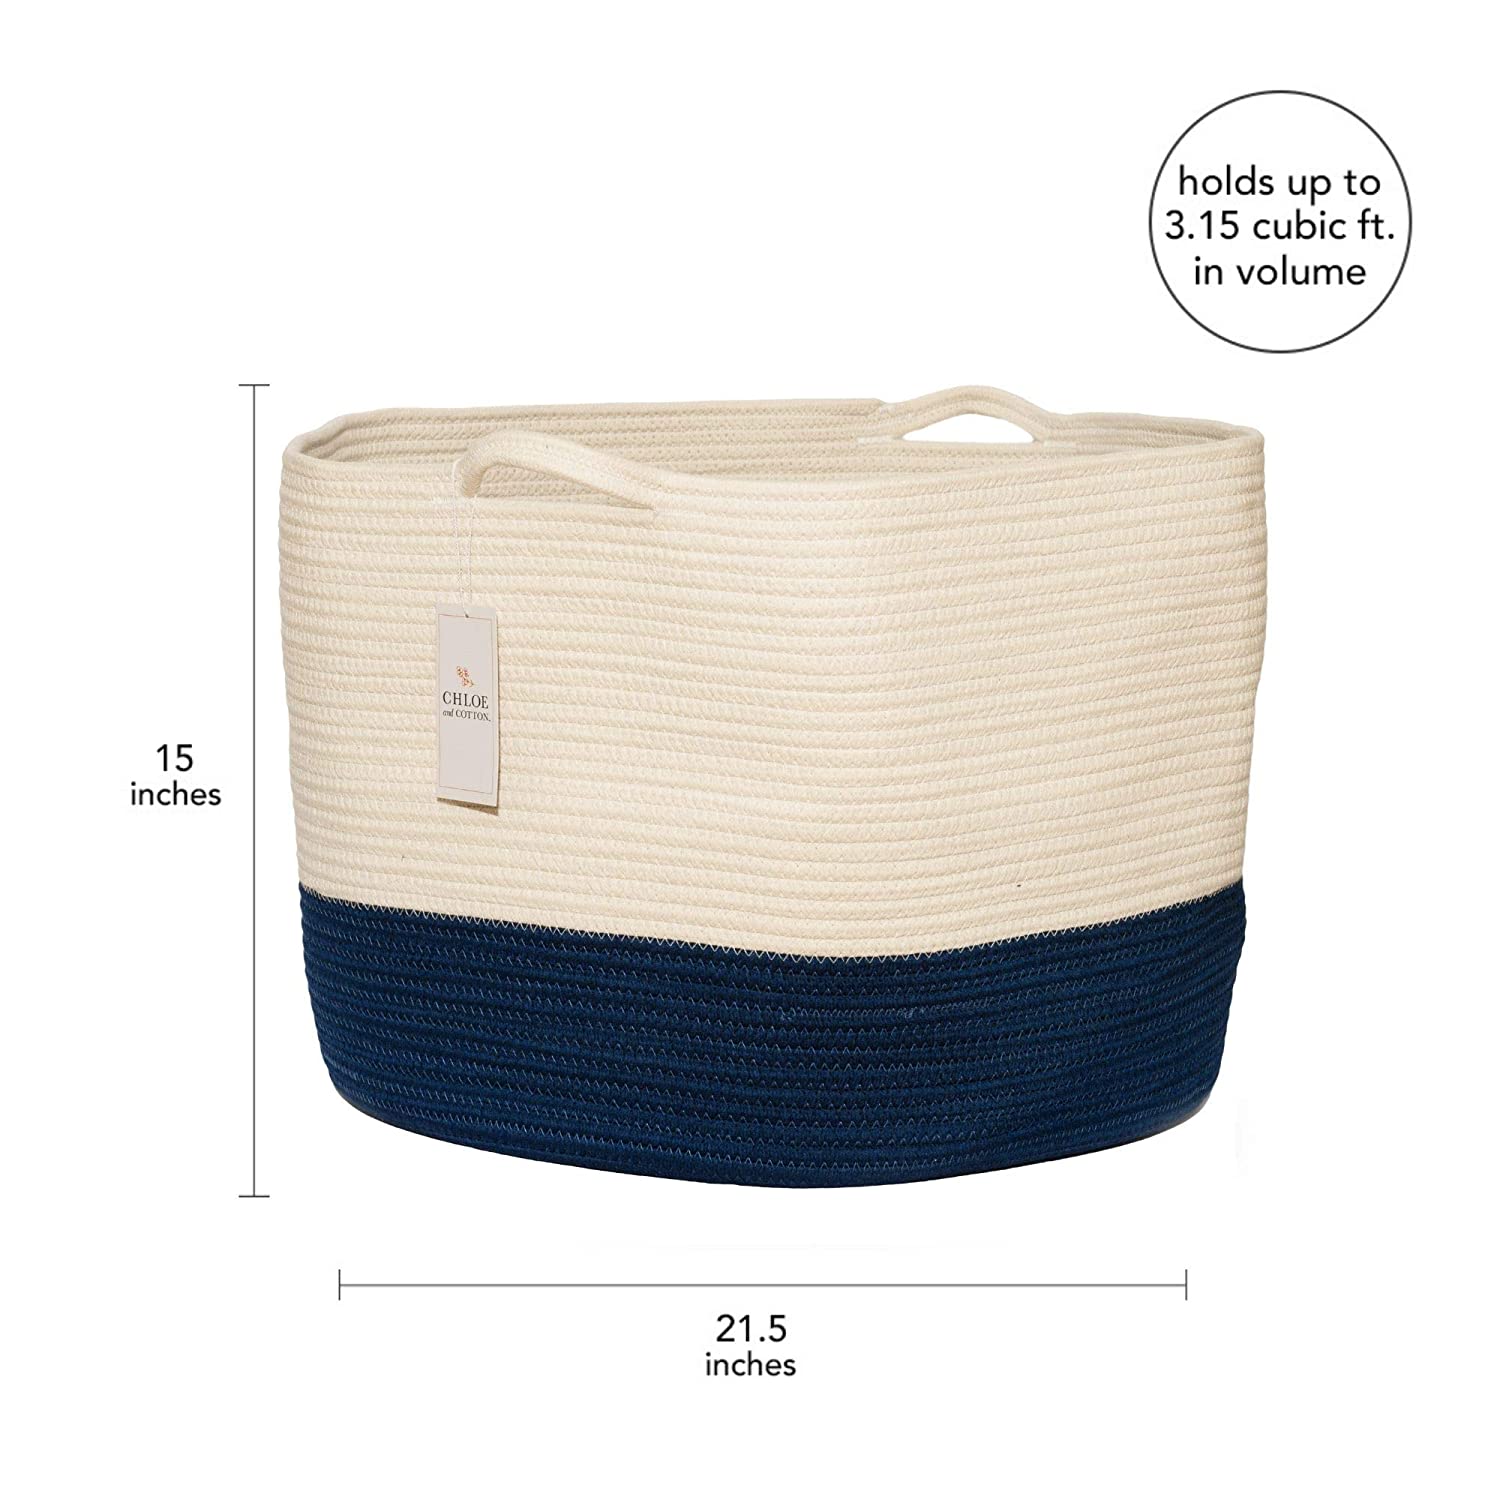 Chloe and Cotton XXXL Extra Large Woven Rope Basket with Handles for Storage - 15" H x 21.5" D - Navy White - image 5 of 5